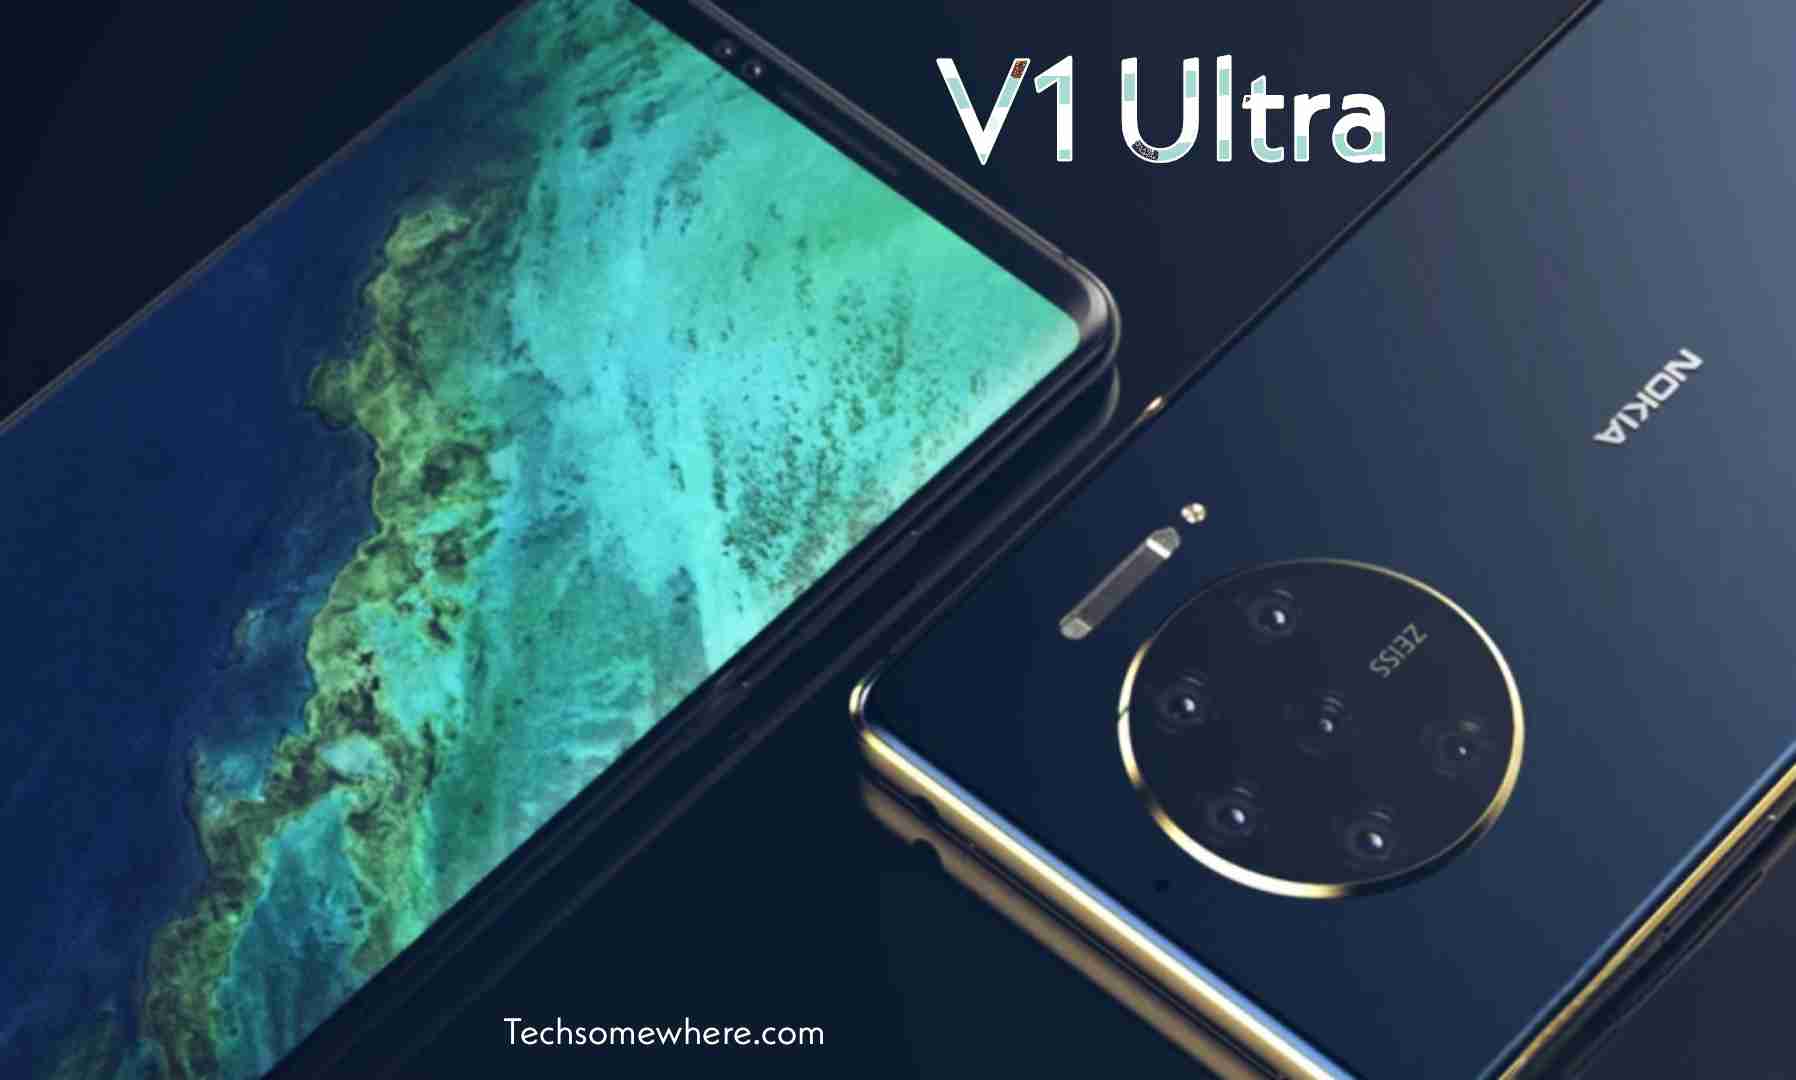 Nokia V1 Ultra (2022) Release Date, Price, Full Specifications & Secret Features - Techsomewhere